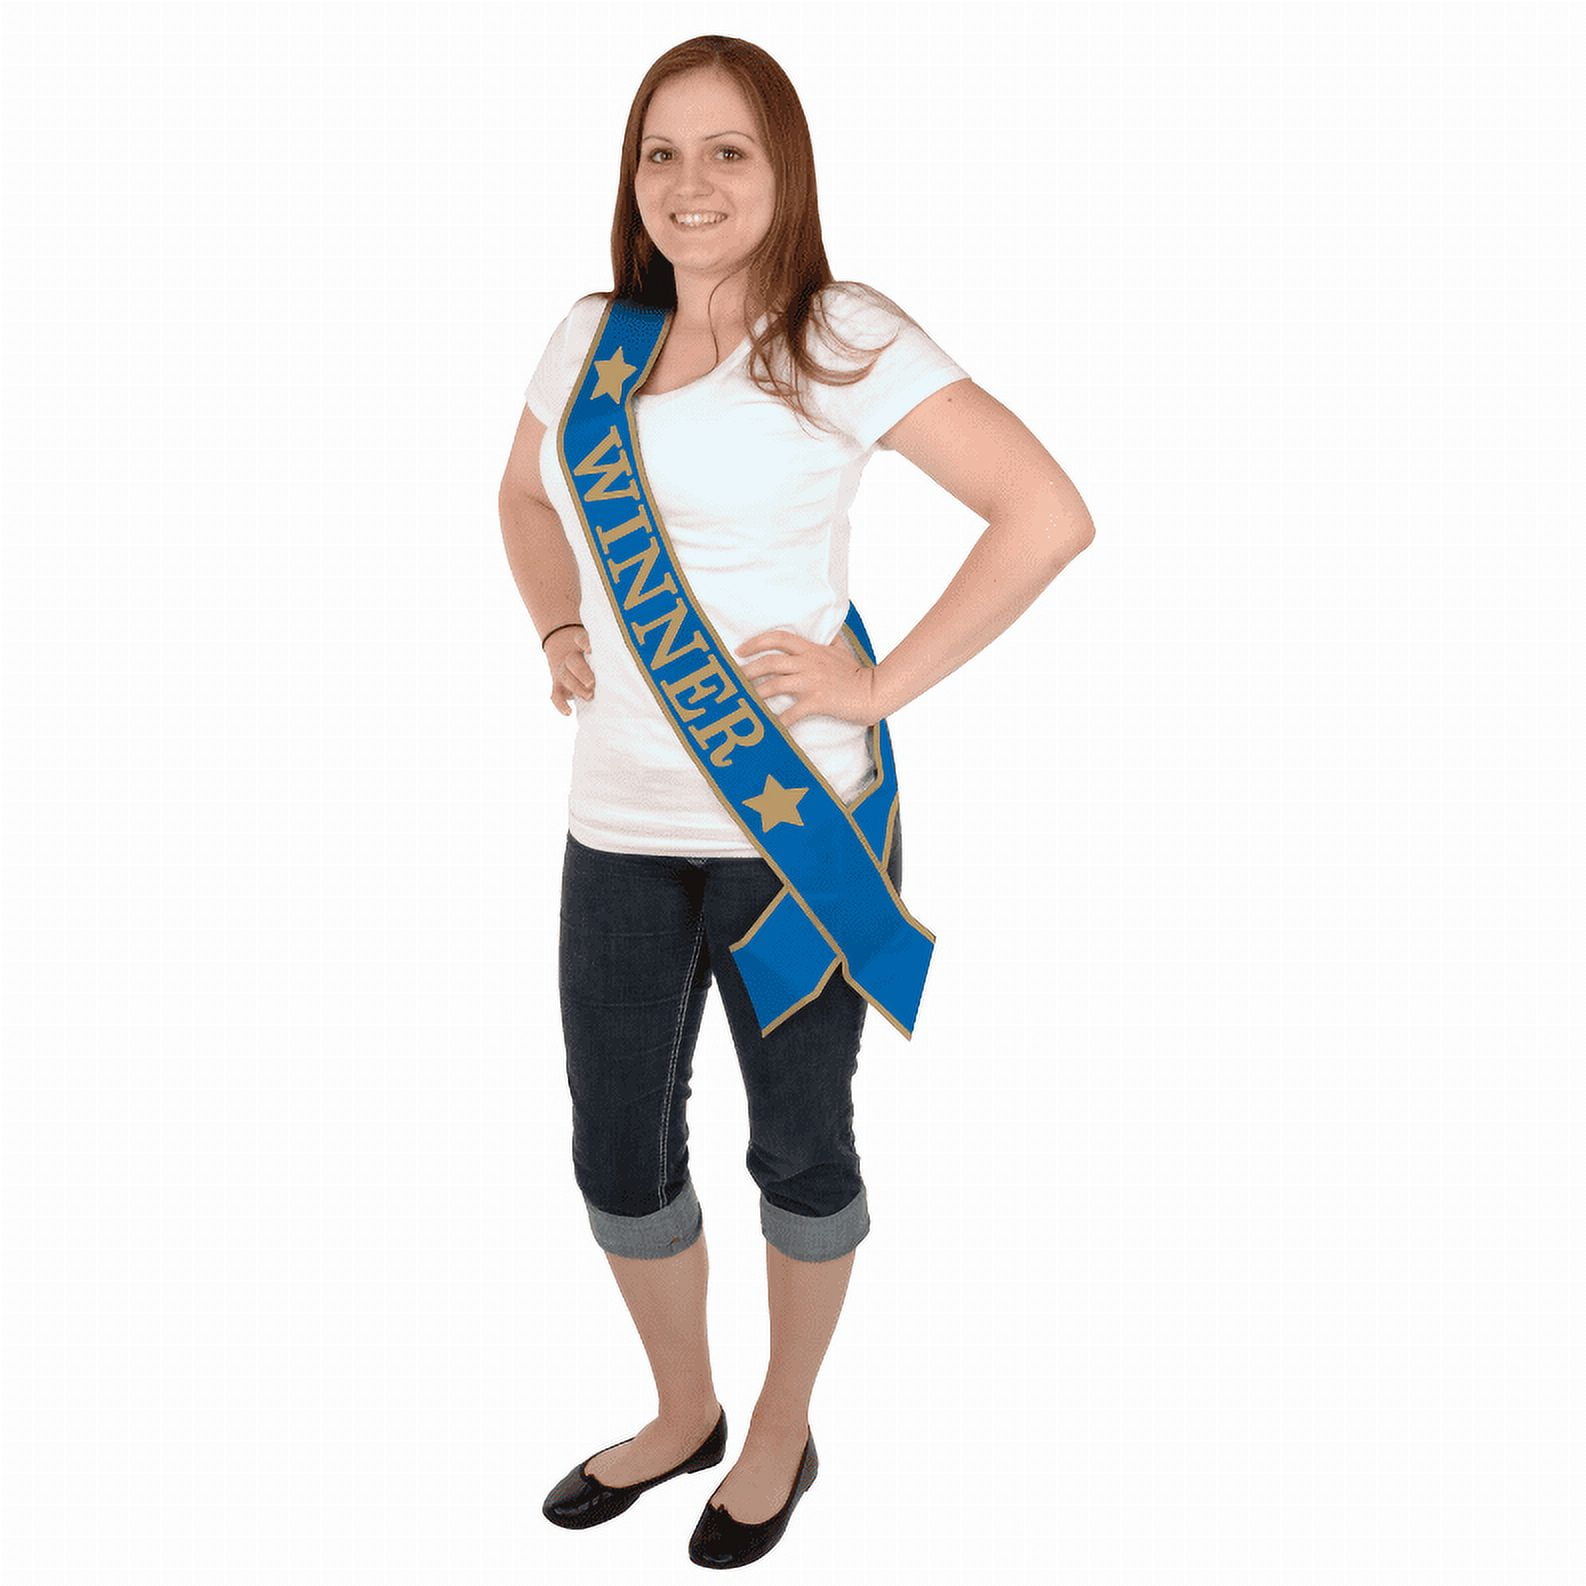 Designs Sashes (Multiple Available)